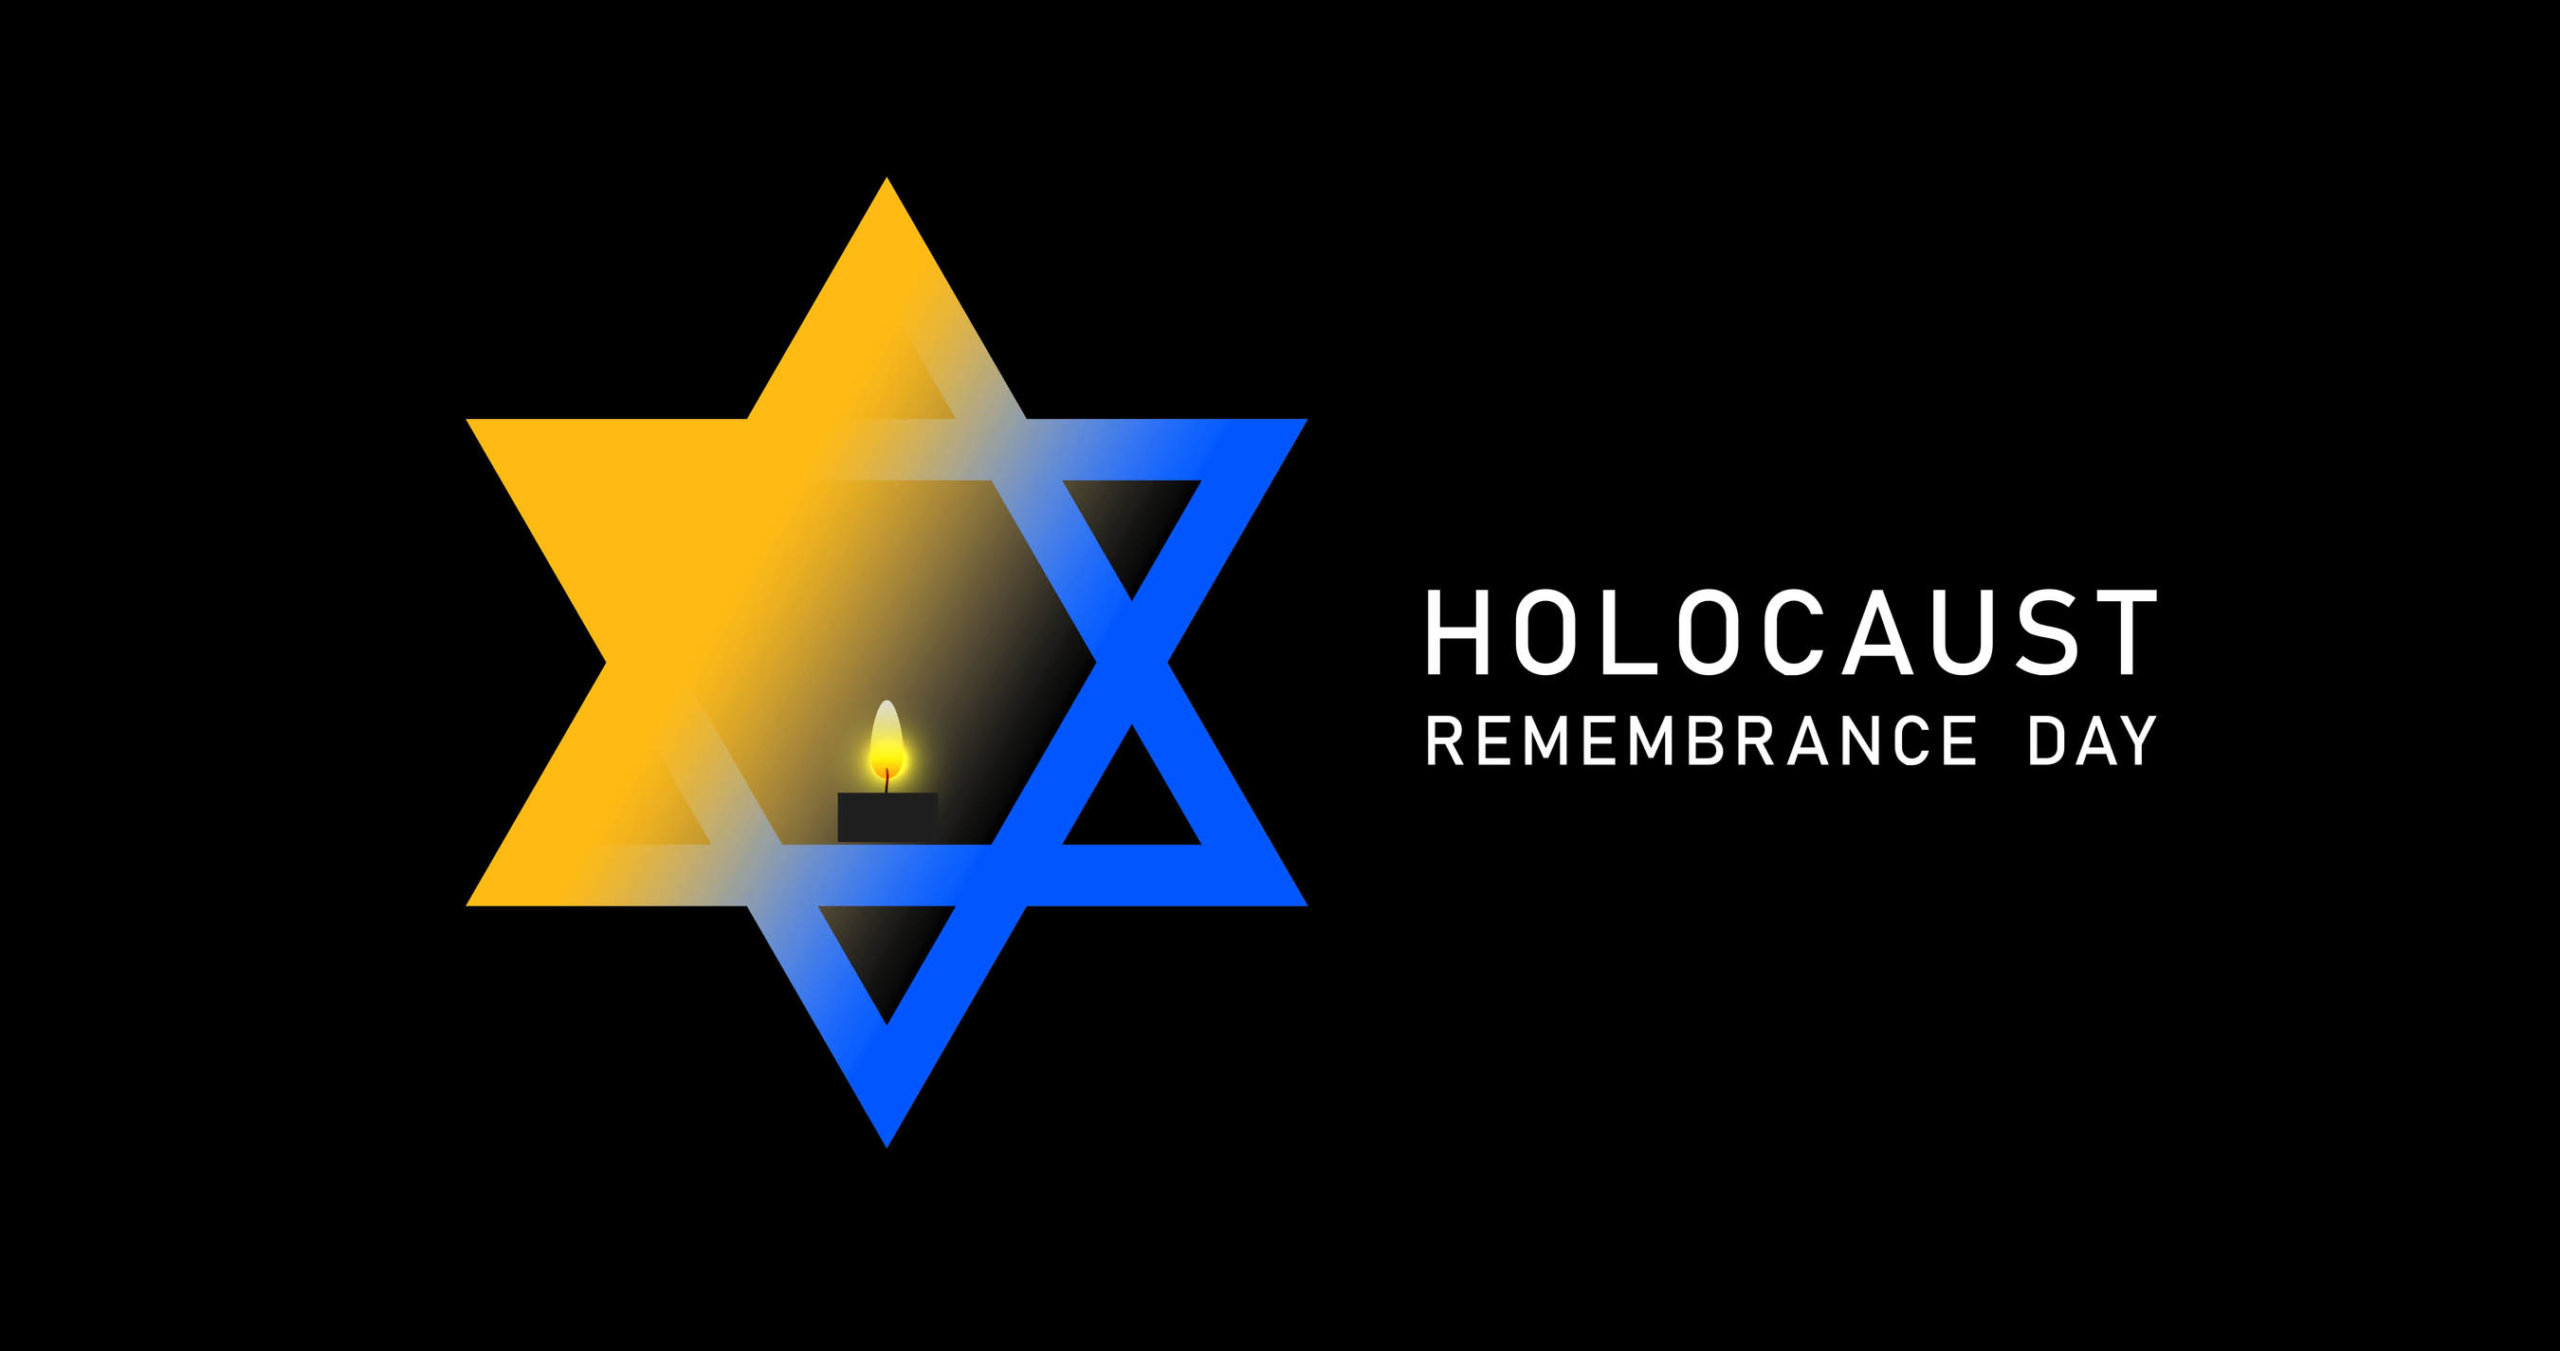 Holocaust Remembrance Day is January 27.